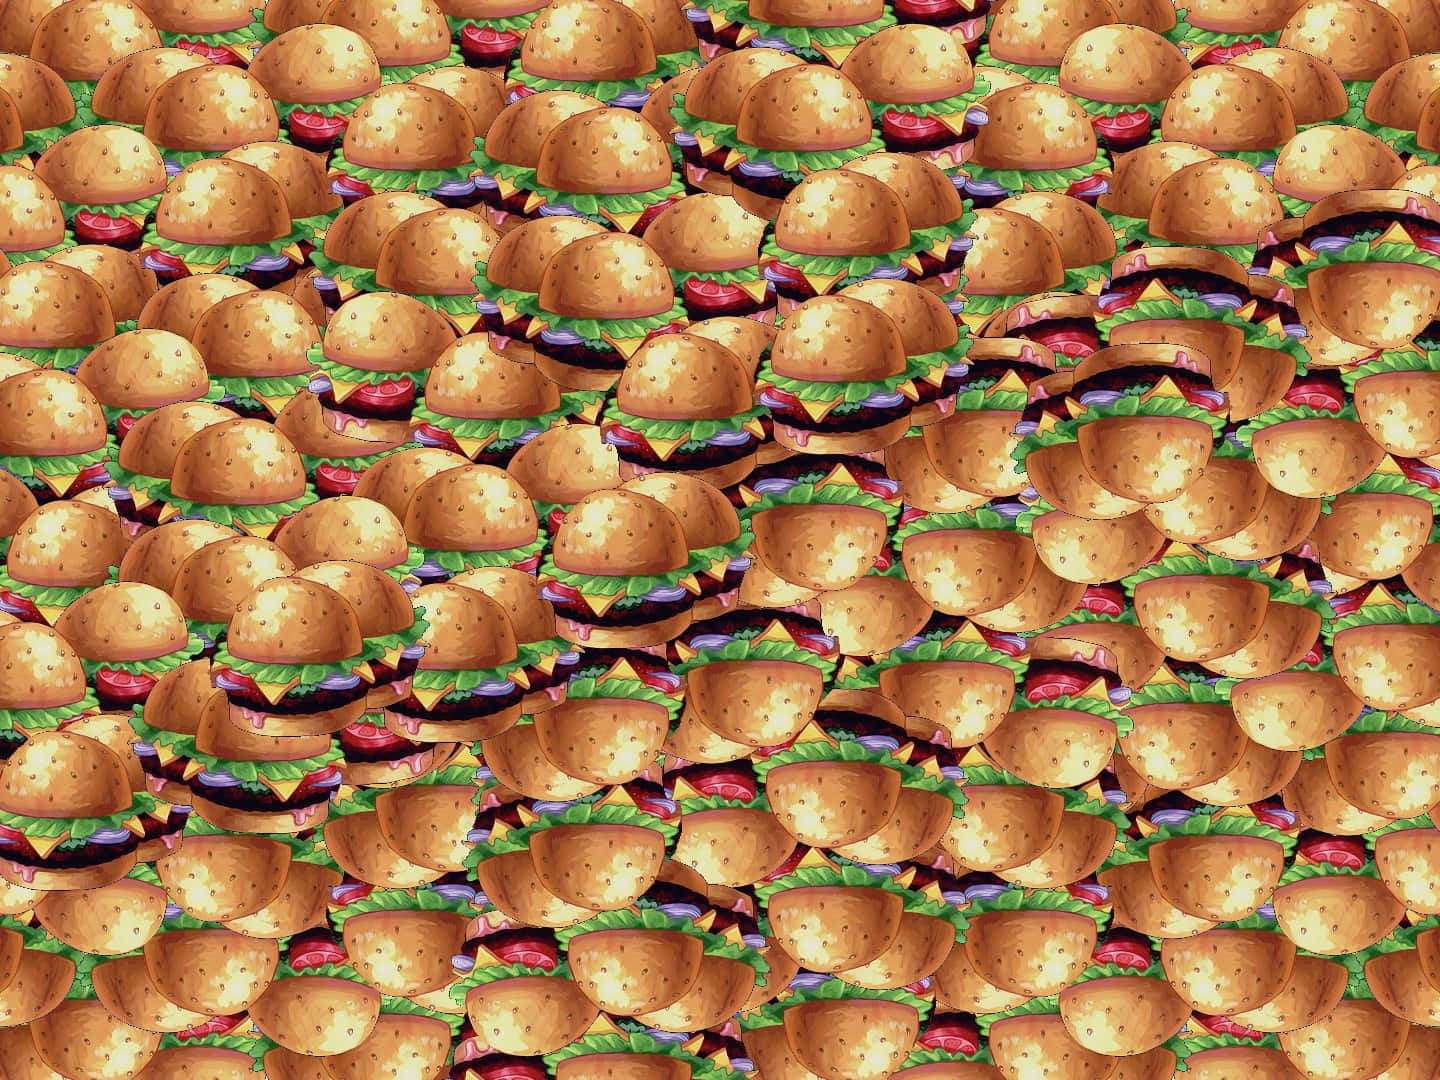 The delicious Krabby Patty, signature dish of the Krusty Krab Wallpaper